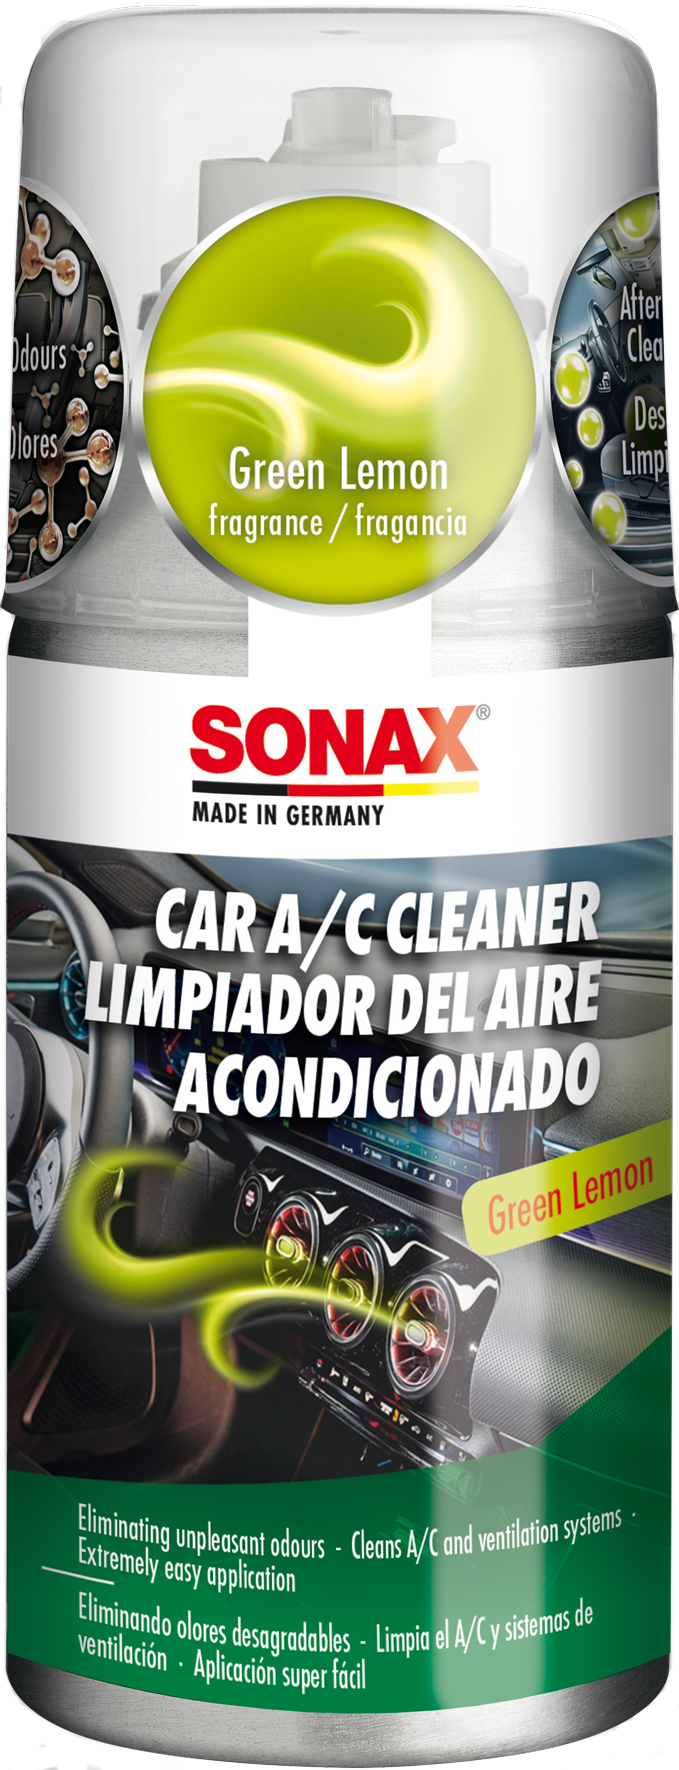 Product image download - SONAX Media